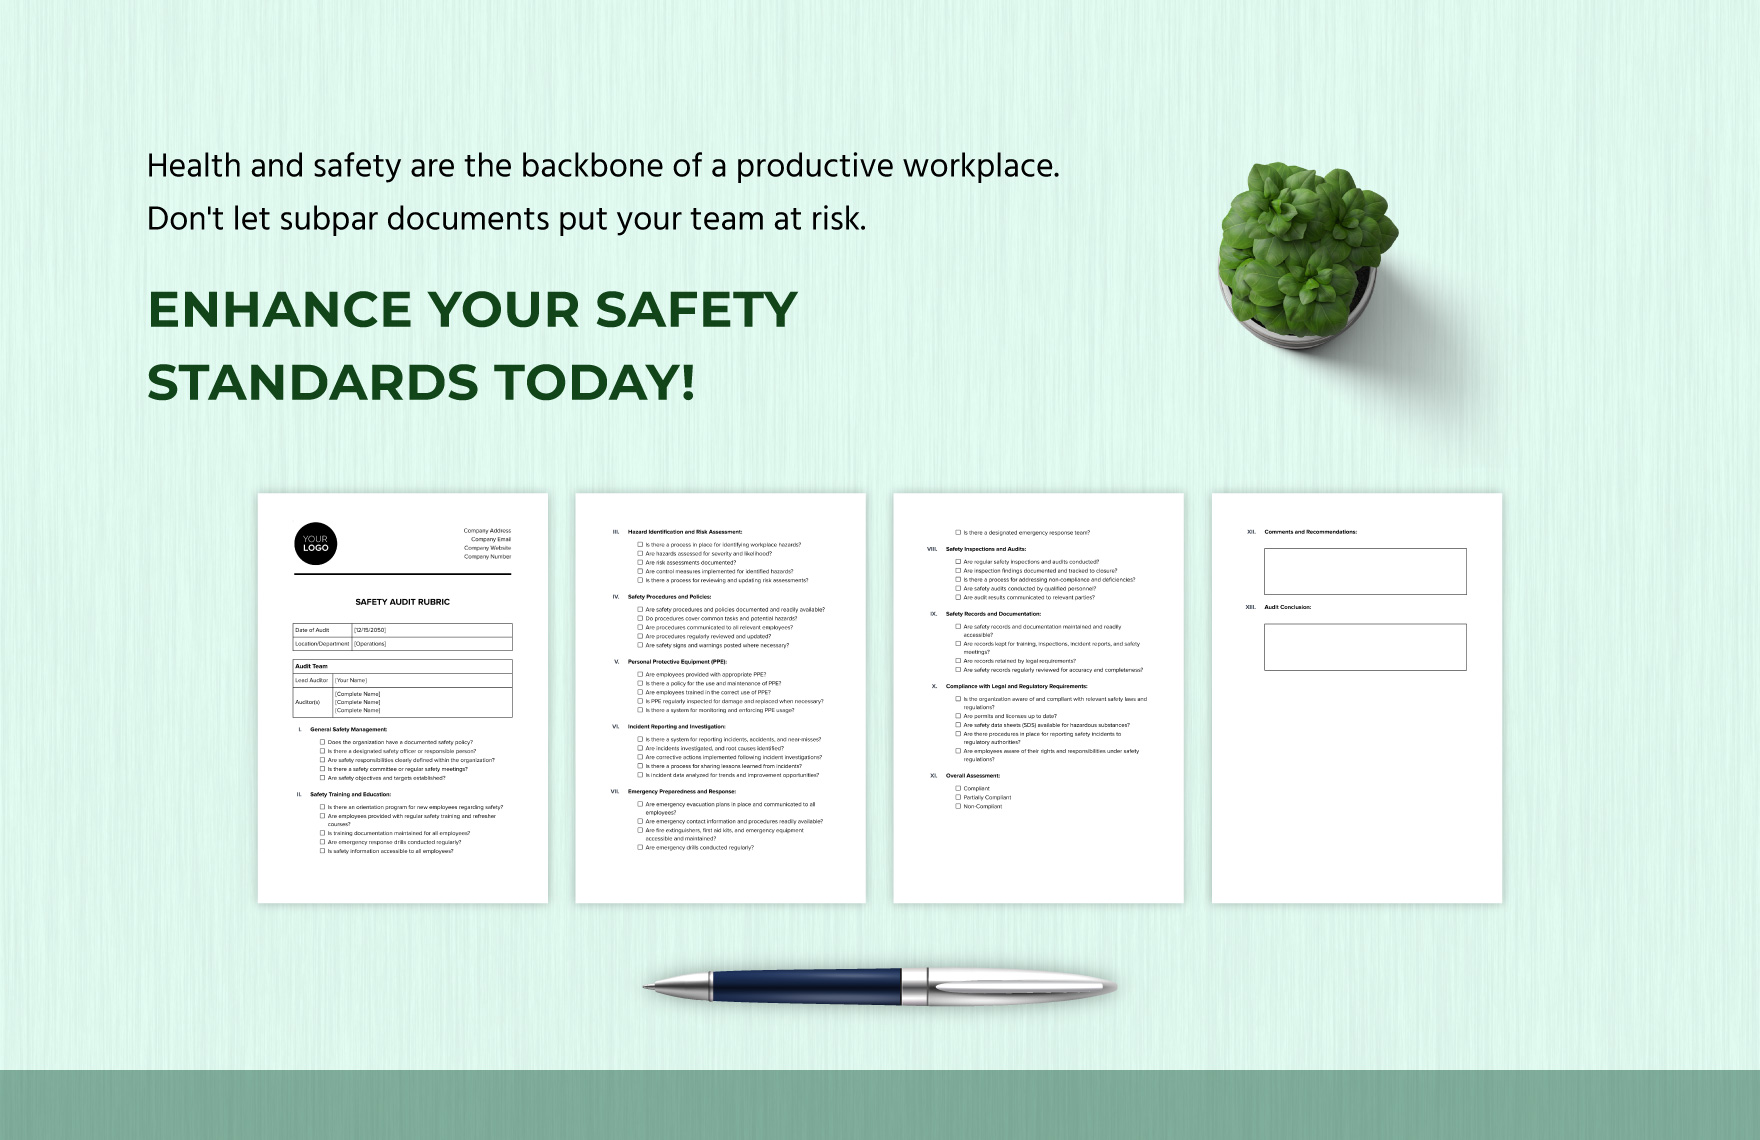 Safety Audit Rubric Template